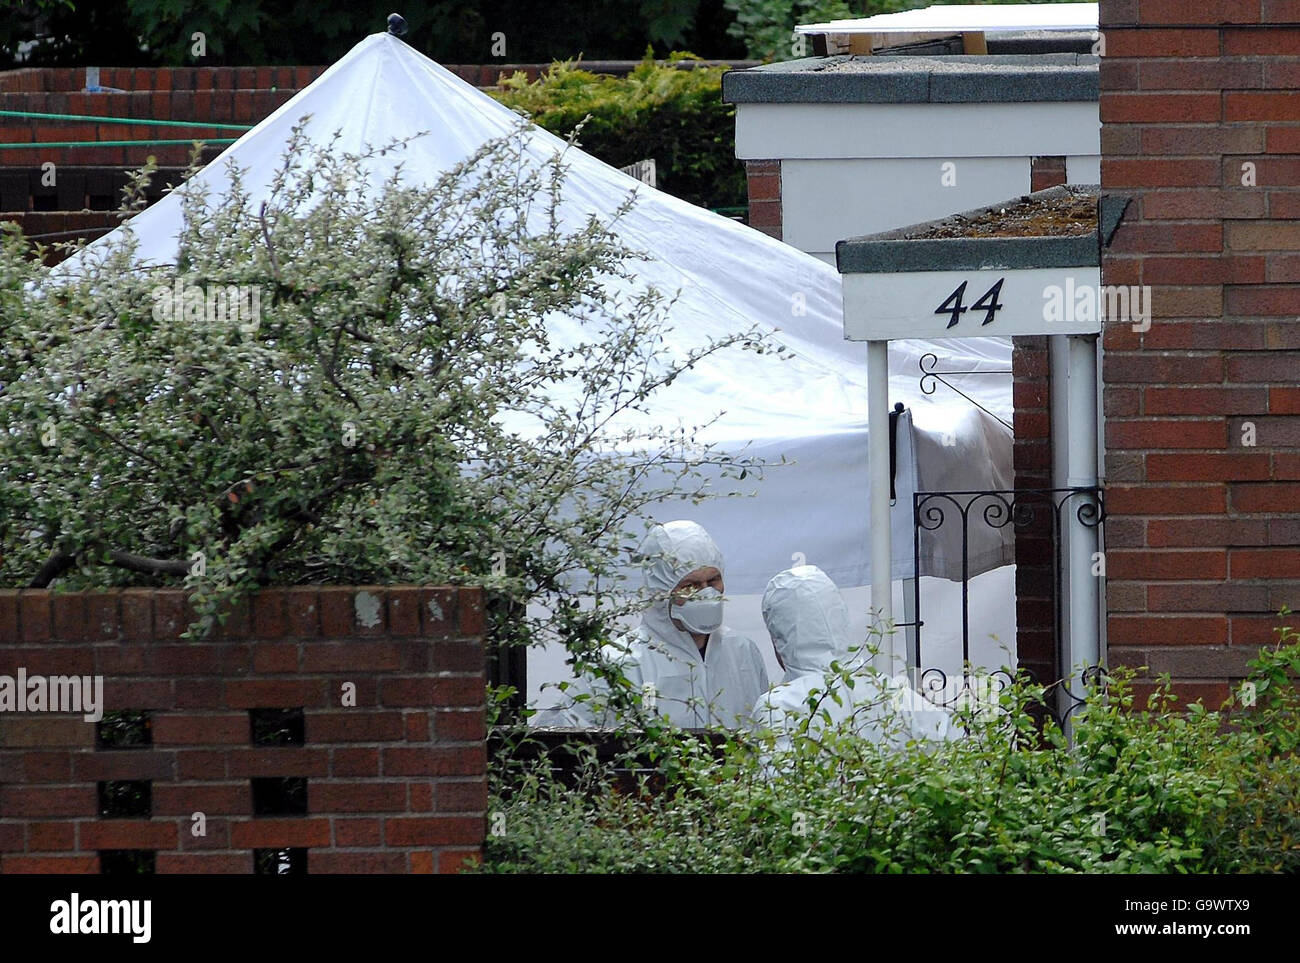 Forensic officers search the scene of yesterday's shootings at New Park Road, in the Castlefields area in Shrewsbury. Stock Photo